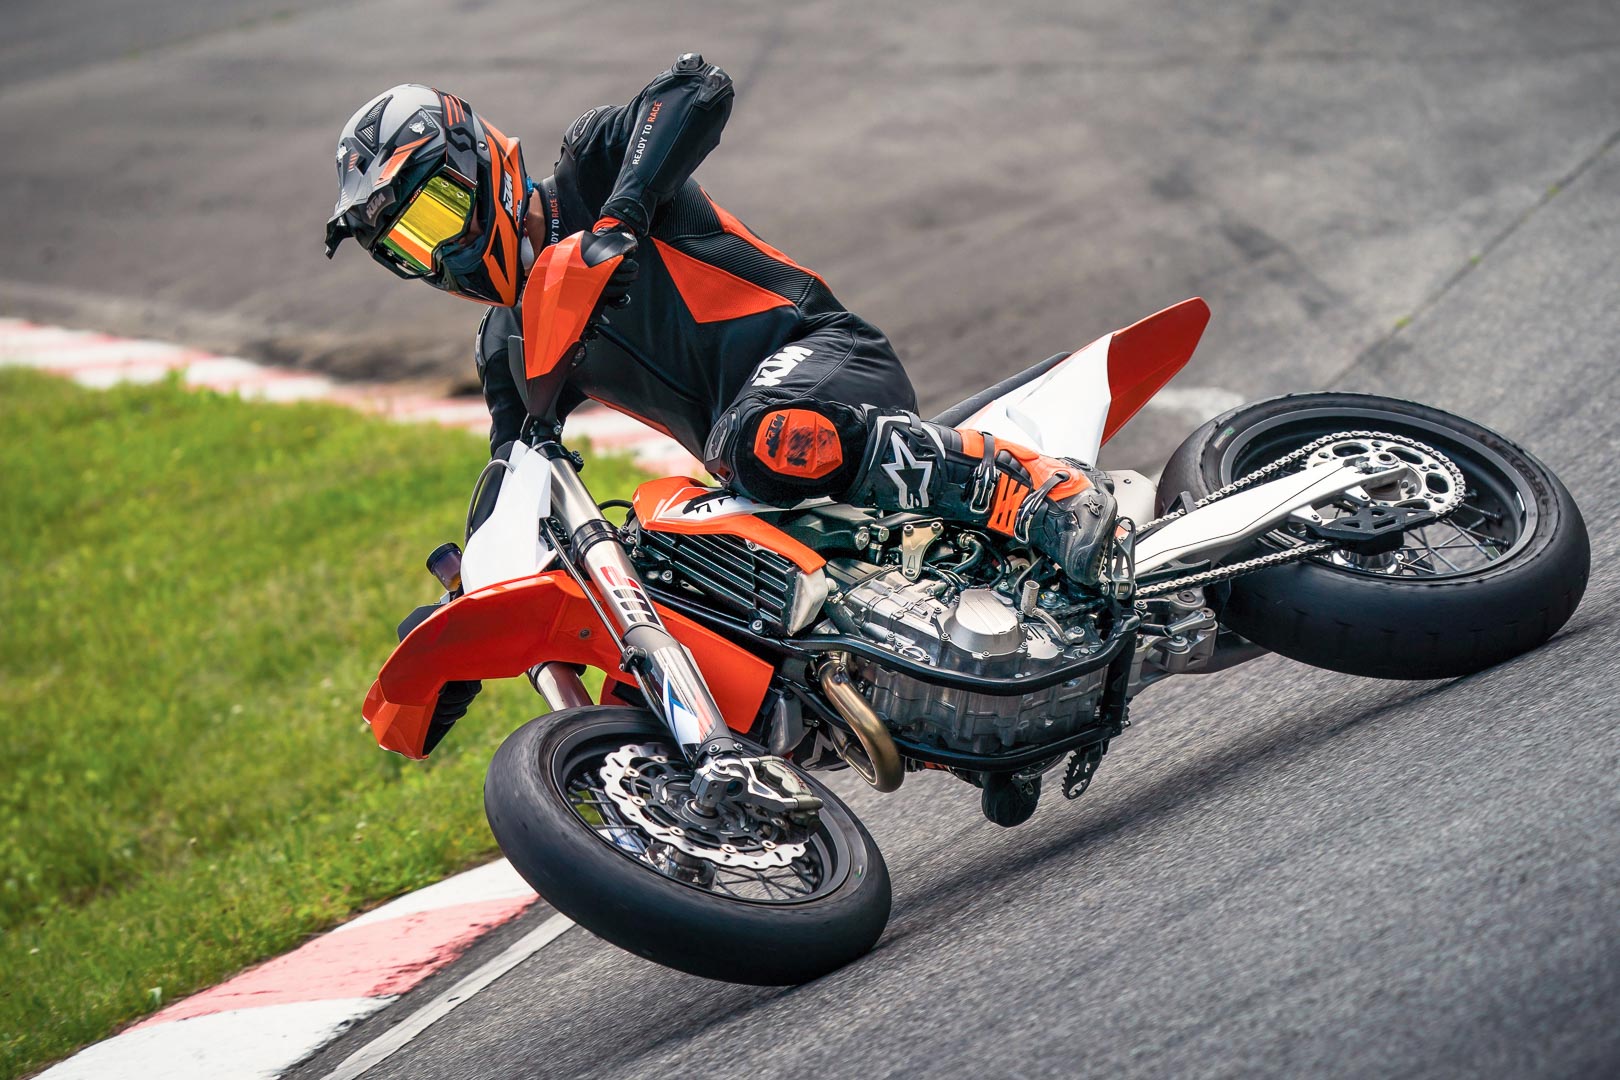 2021 KTM 450 SMR First Look supermoto racing motorcycle 3